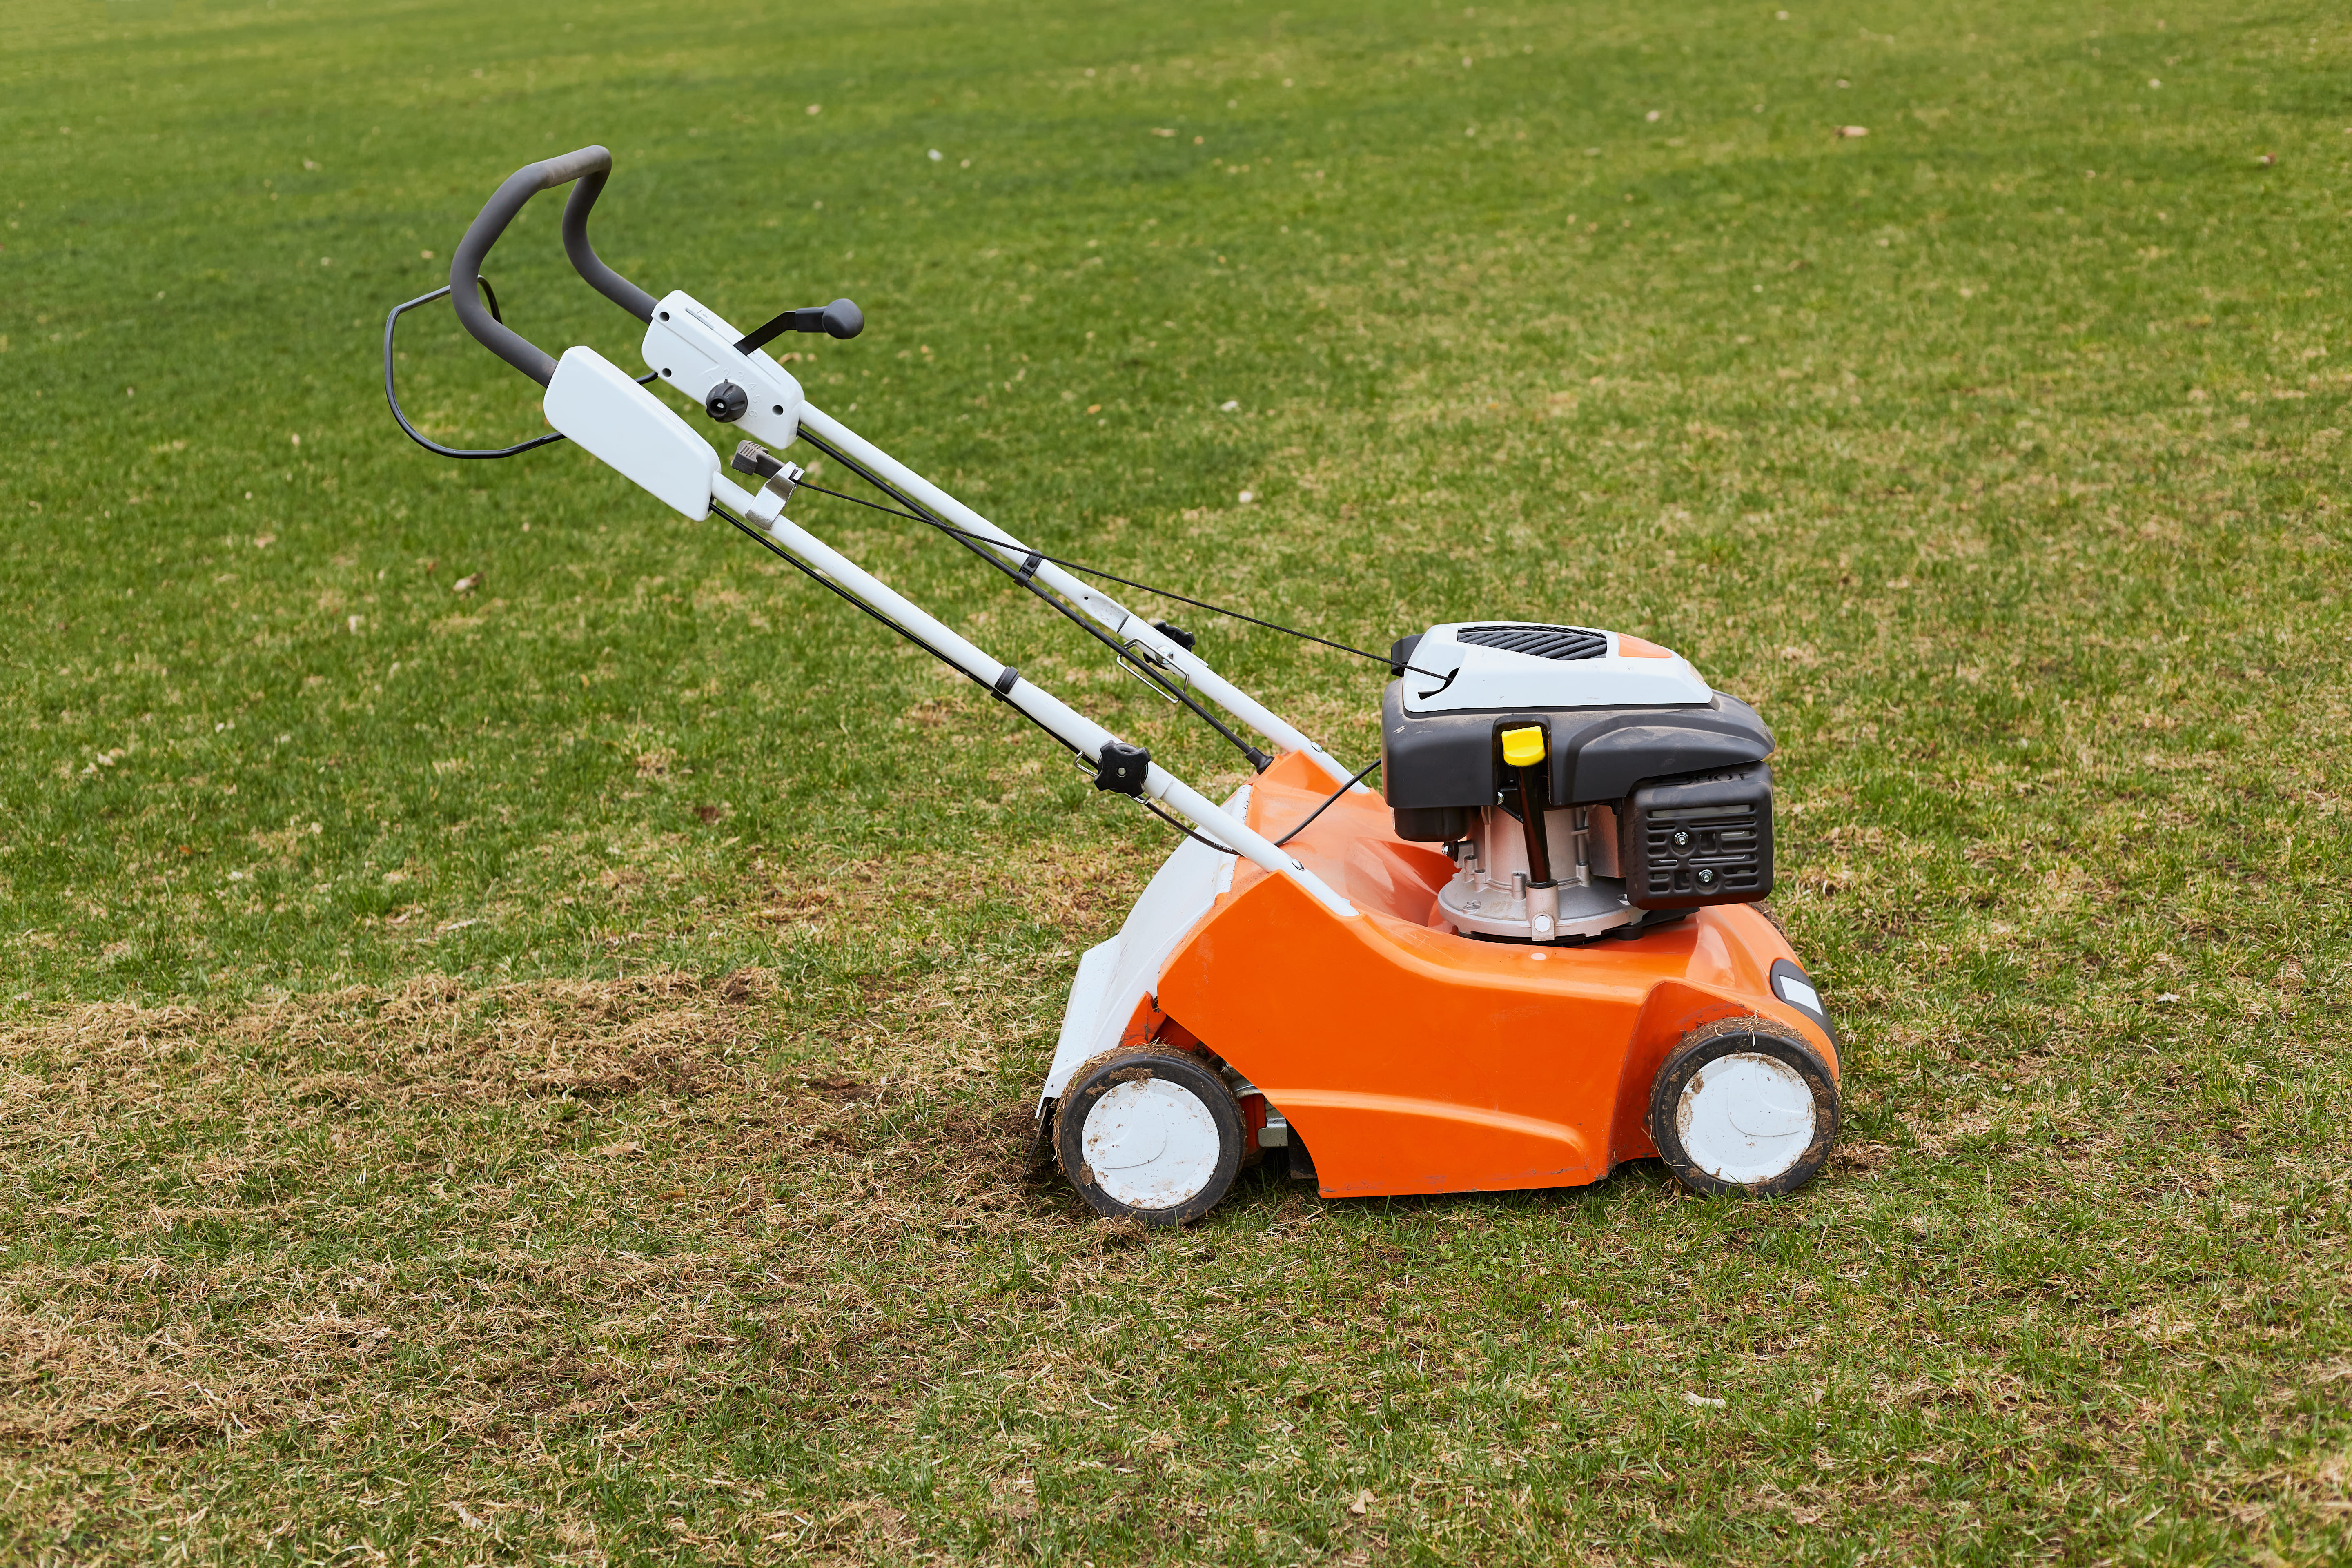 A photograph of a person, likely a gardener or landscaper, standing on a lawn with a green grass background, holding an orange-colored grass cutter or lawn mower, possibly in a residential or commercial outdoor setting